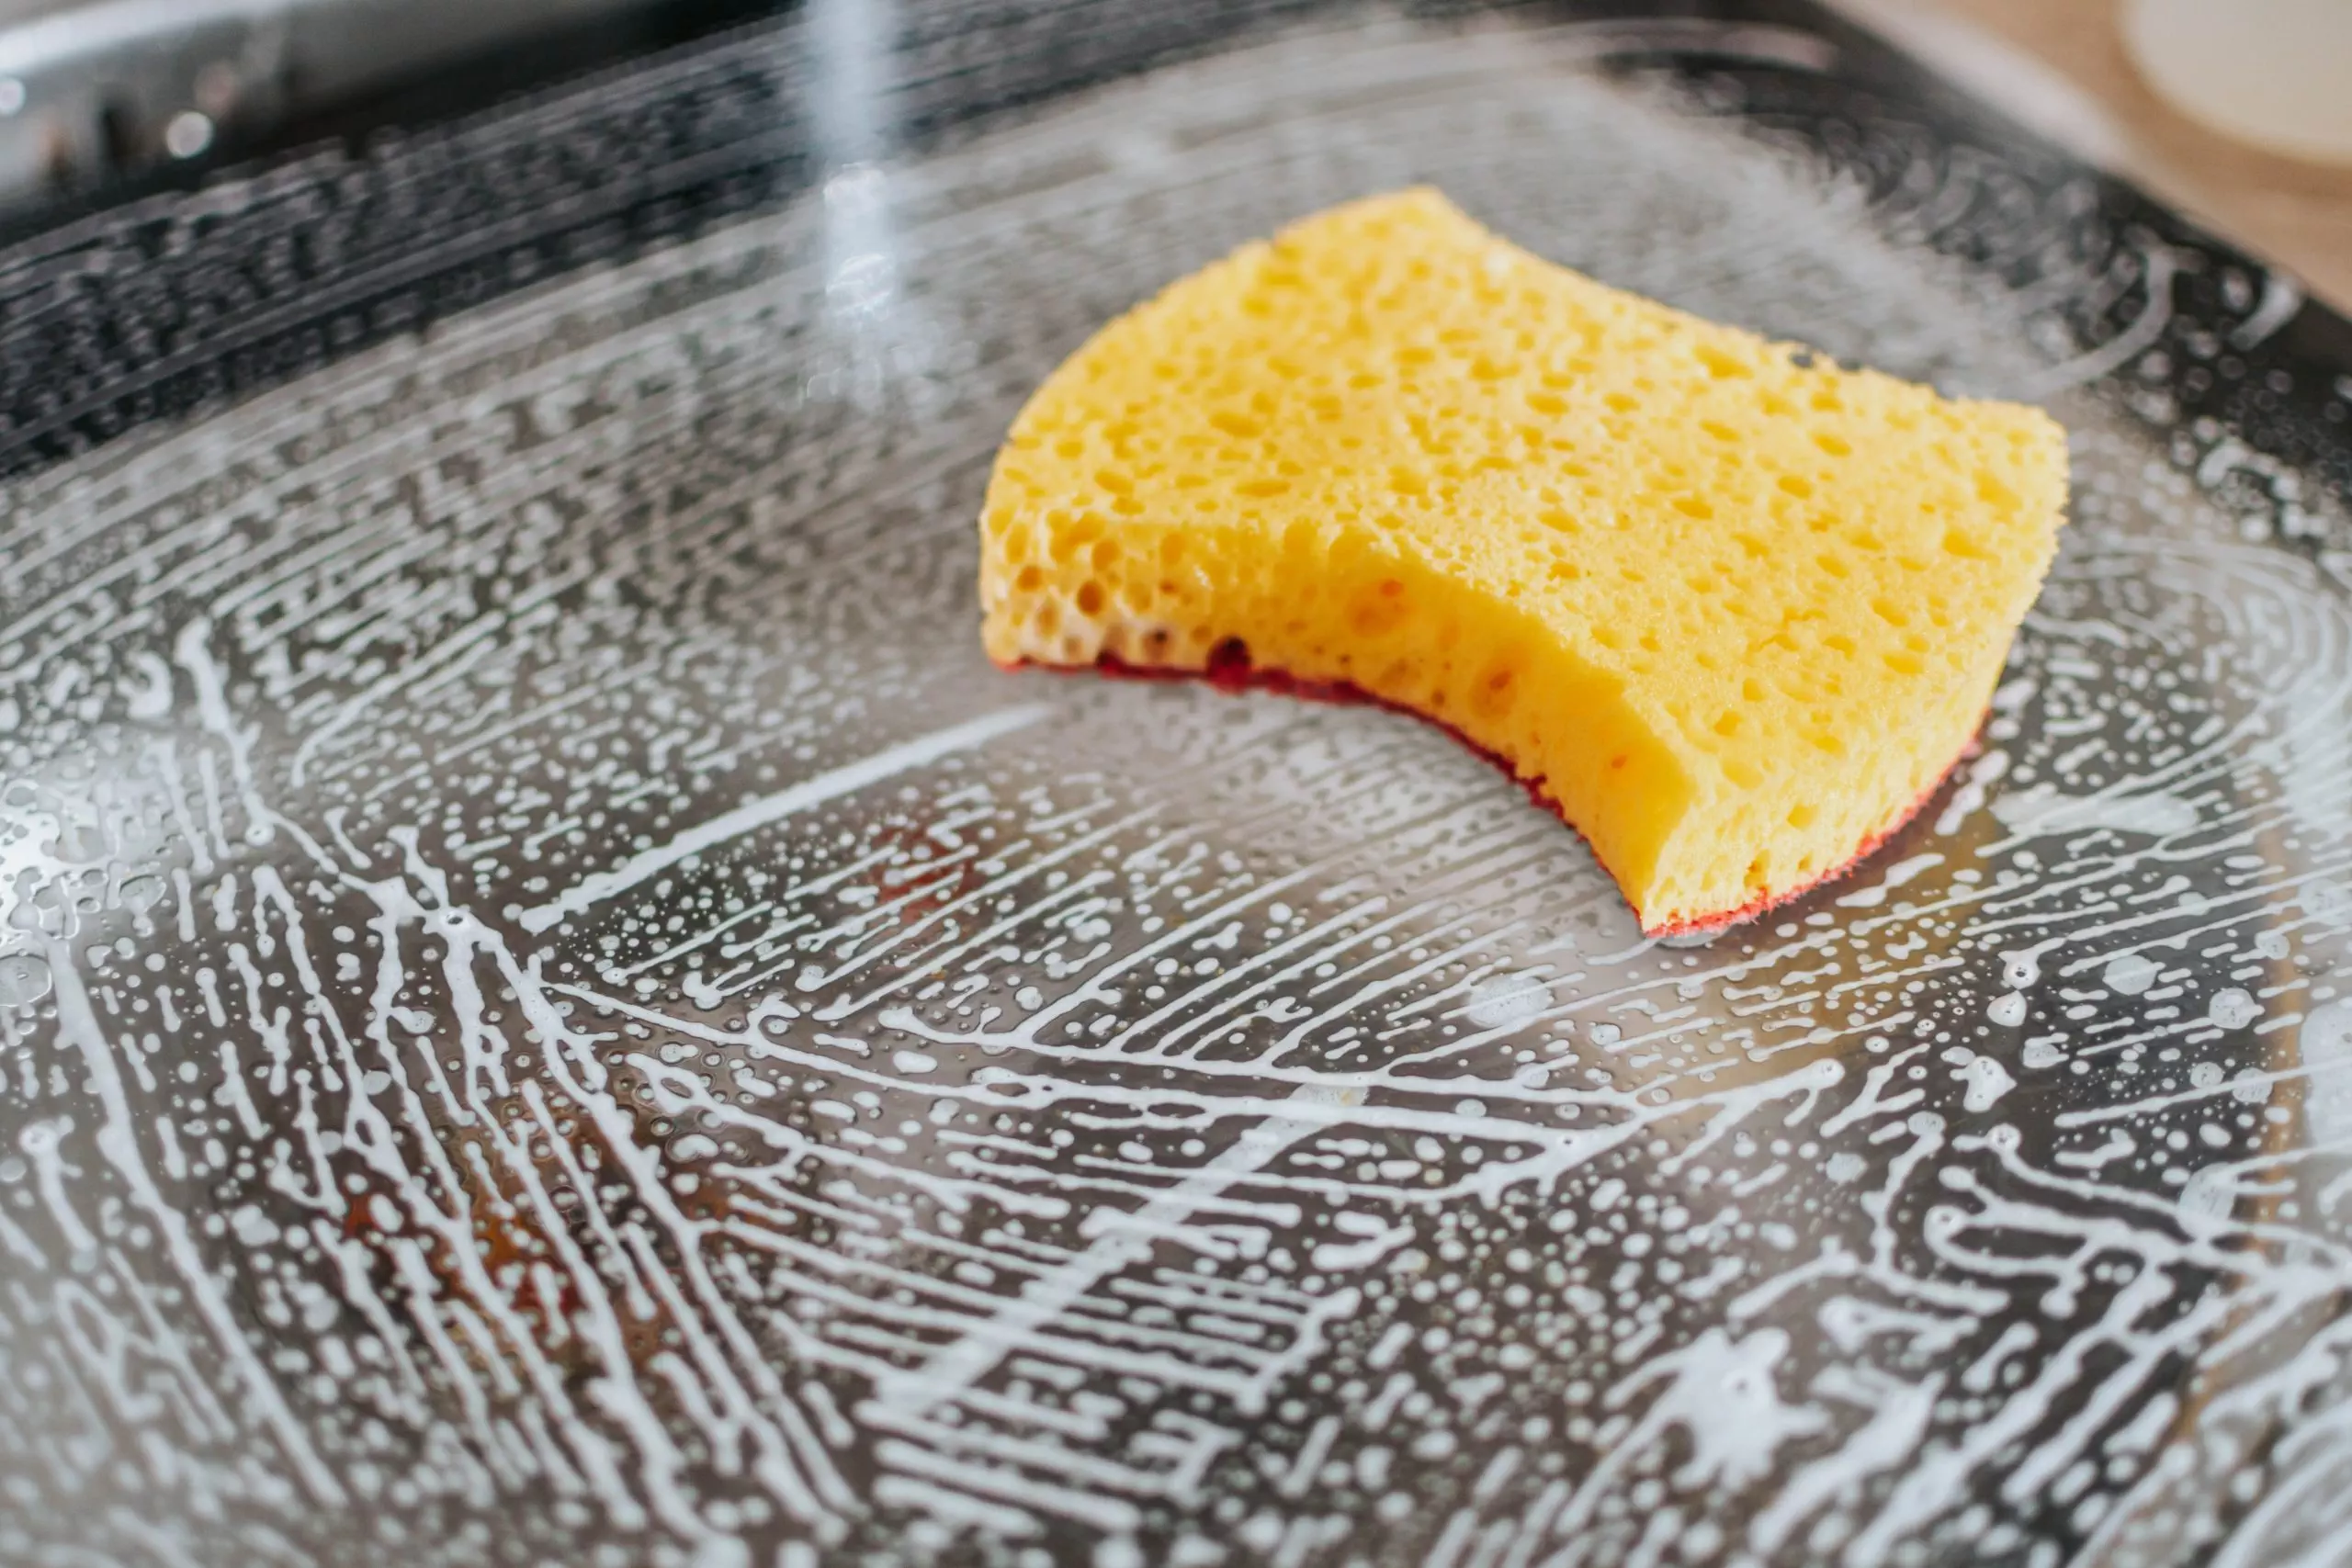 yellow-sponge-cleaning-a-glass-bowl